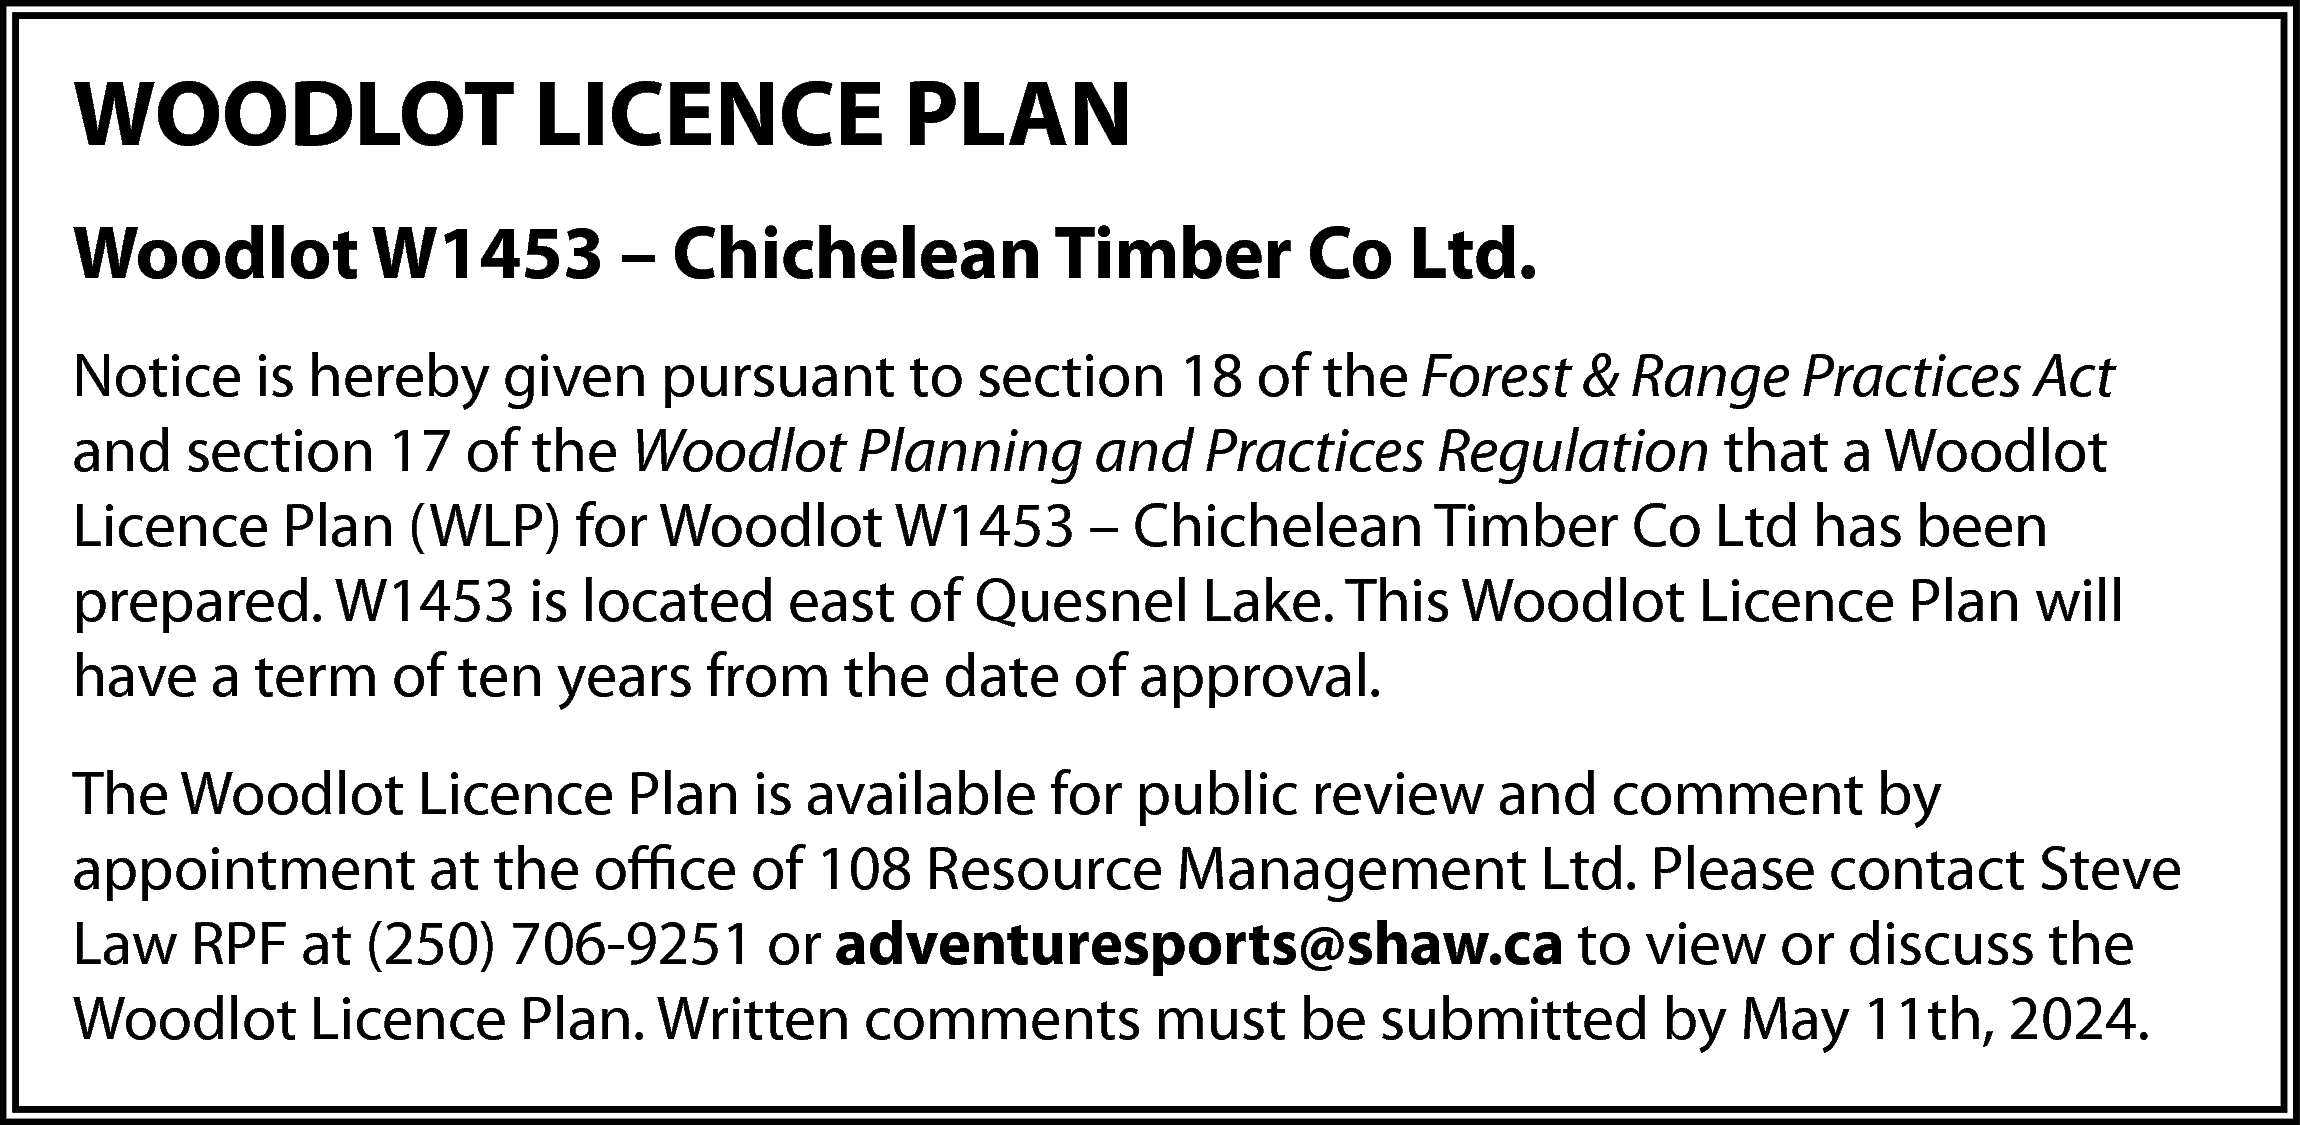 WOODLOT LICENCE PLAN <br>Woodlot W1453  WOODLOT LICENCE PLAN  Woodlot W1453 – Chichelean Timber Co Ltd.  Notice is hereby given pursuant to section 18 of the Forest & Range Practices Act  and section 17 of the Woodlot Planning and Practices Regulation that a Woodlot  Licence Plan (WLP) for Woodlot W1453 – Chichelean Timber Co Ltd has been  prepared. W1453 is located east of Quesnel Lake. This Woodlot Licence Plan will  have a term of ten years from the date of approval.  The Woodlot Licence Plan is available for public review and comment by  appointment at the office of 108 Resource Management Ltd. Please contact Steve  Law RPF at (250) 706-9251 or adventuresports@shaw.ca to view or discuss the  Woodlot Licence Plan. Written comments must be submitted by May 11th, 2024.    